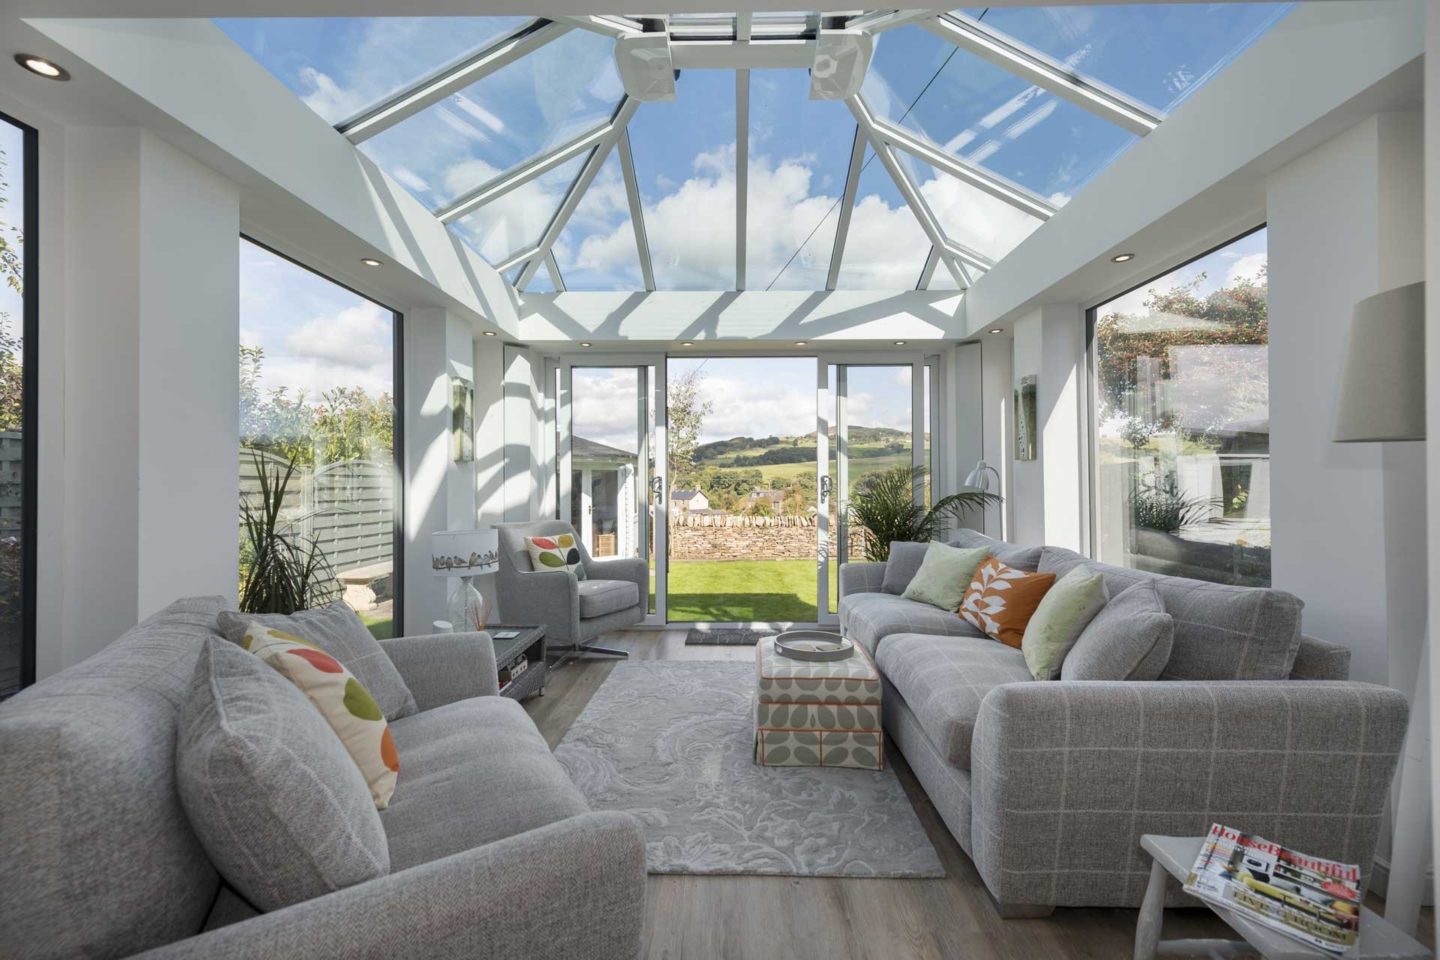 Conservatories near me in Sidcup, Kent